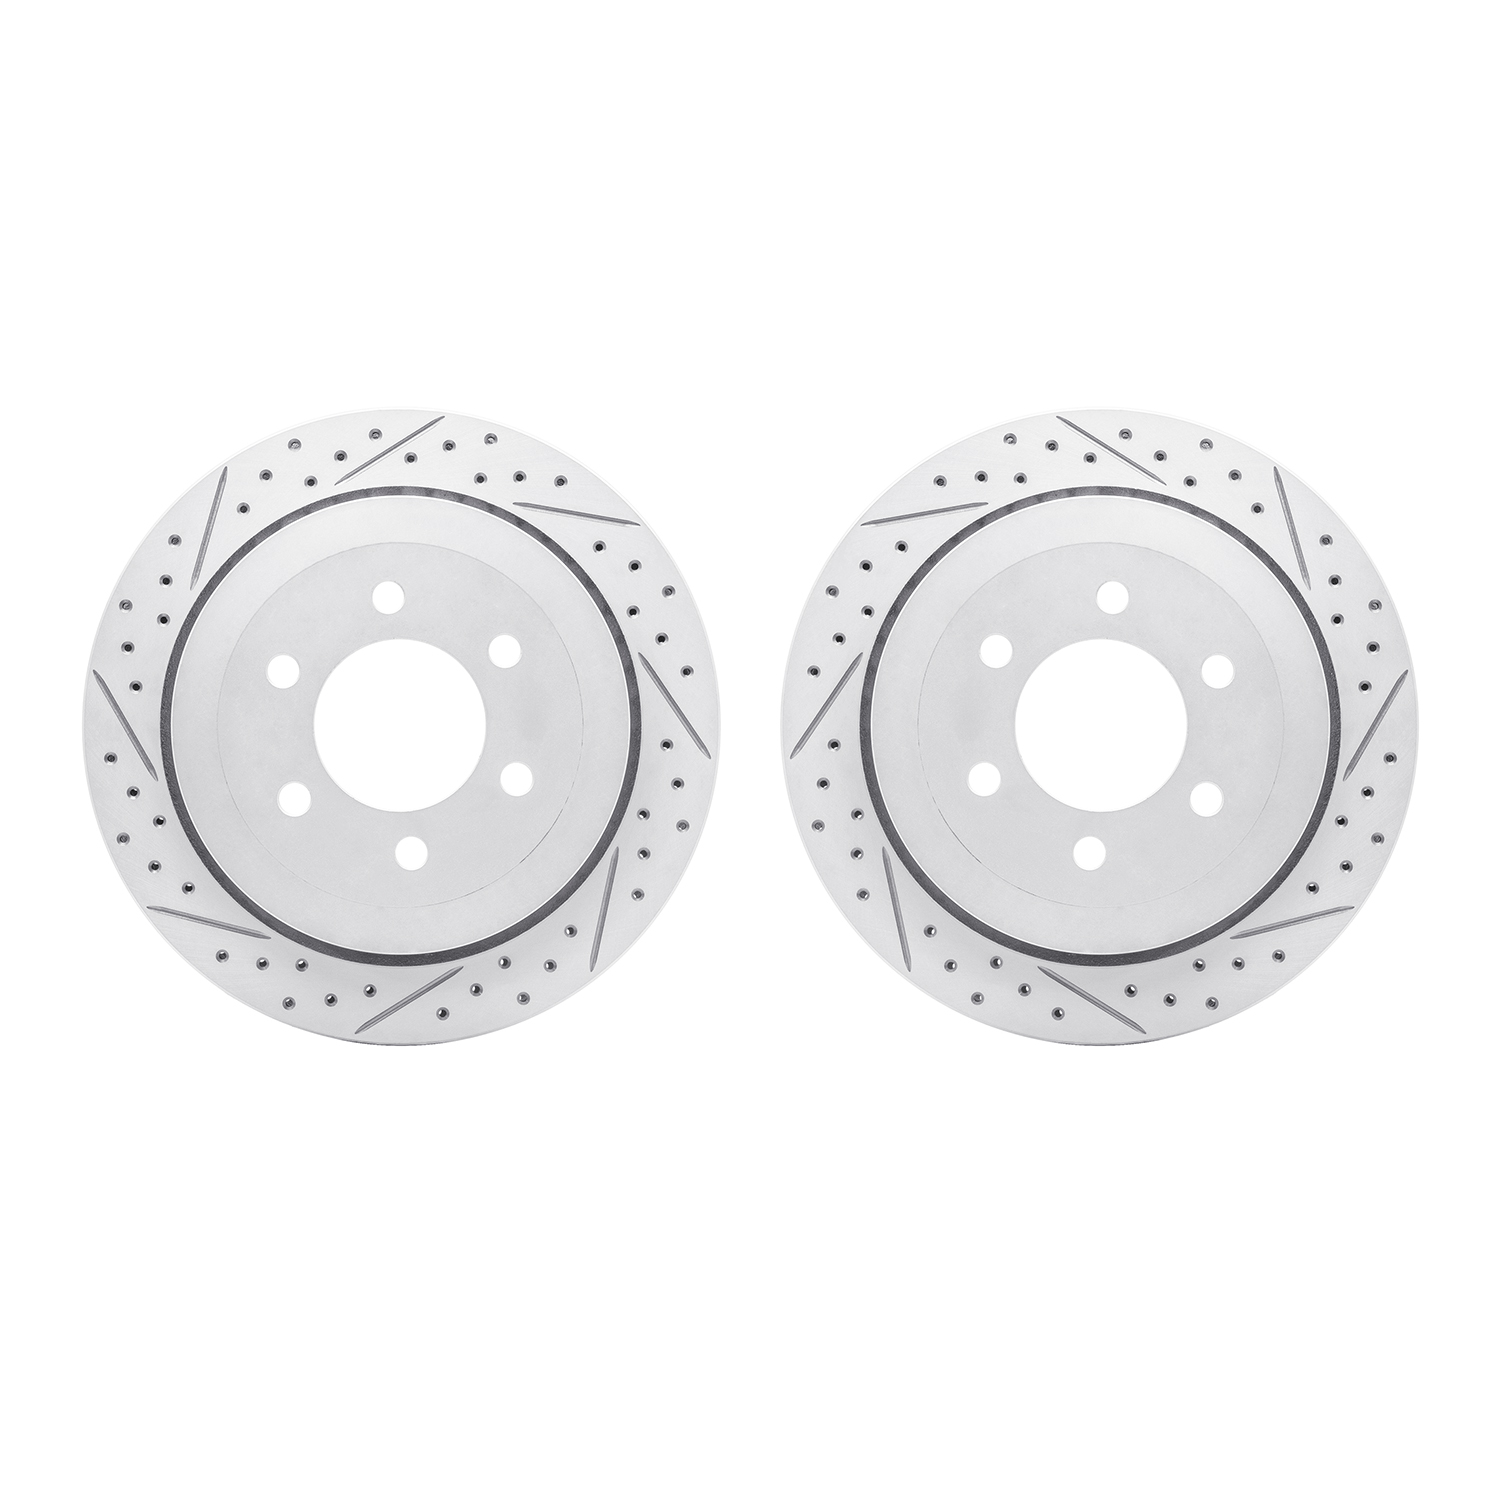 2002-54138 Geoperformance Drilled/Slotted Brake Rotors, 2007-2017 Ford/Lincoln/Mercury/Mazda, Position: Rear